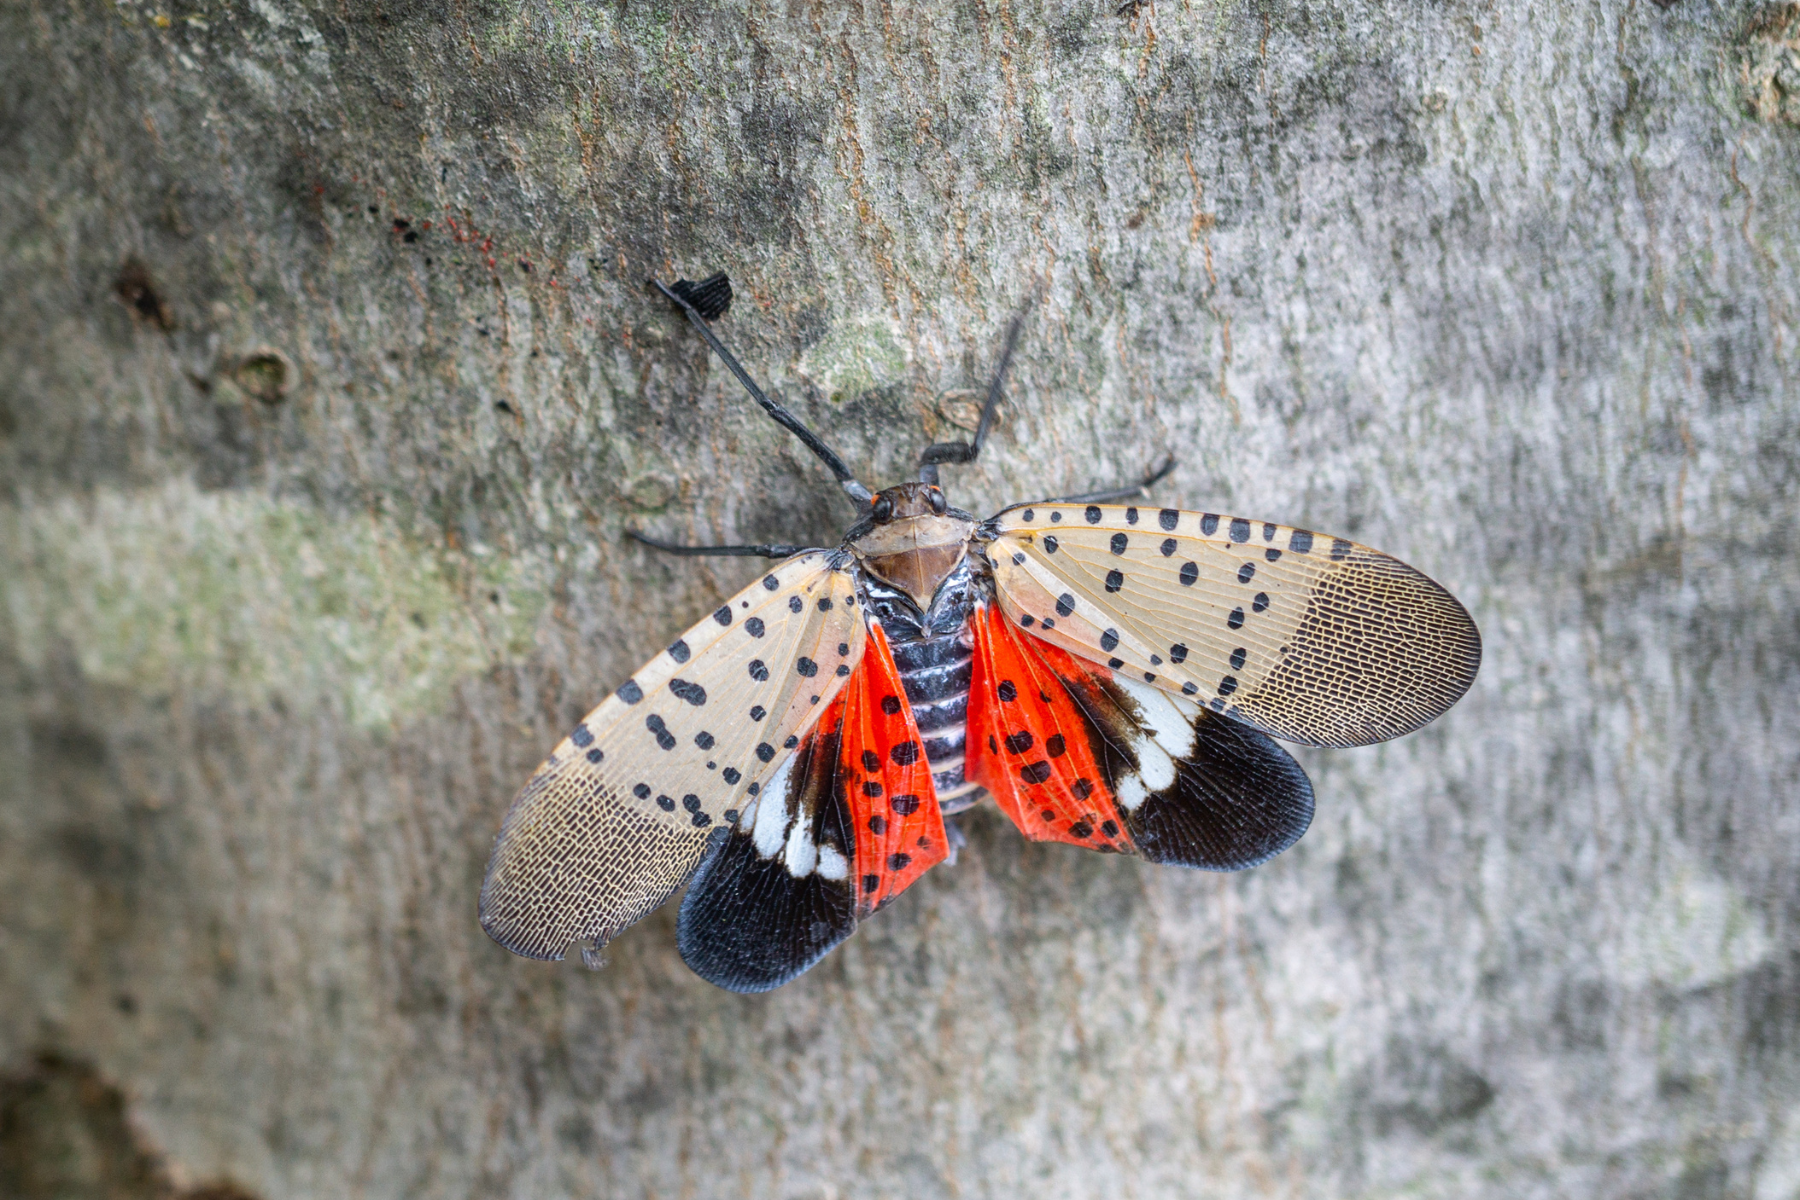 Up close image of a spotted lantern fly with its wings expanded, showing its entire body.